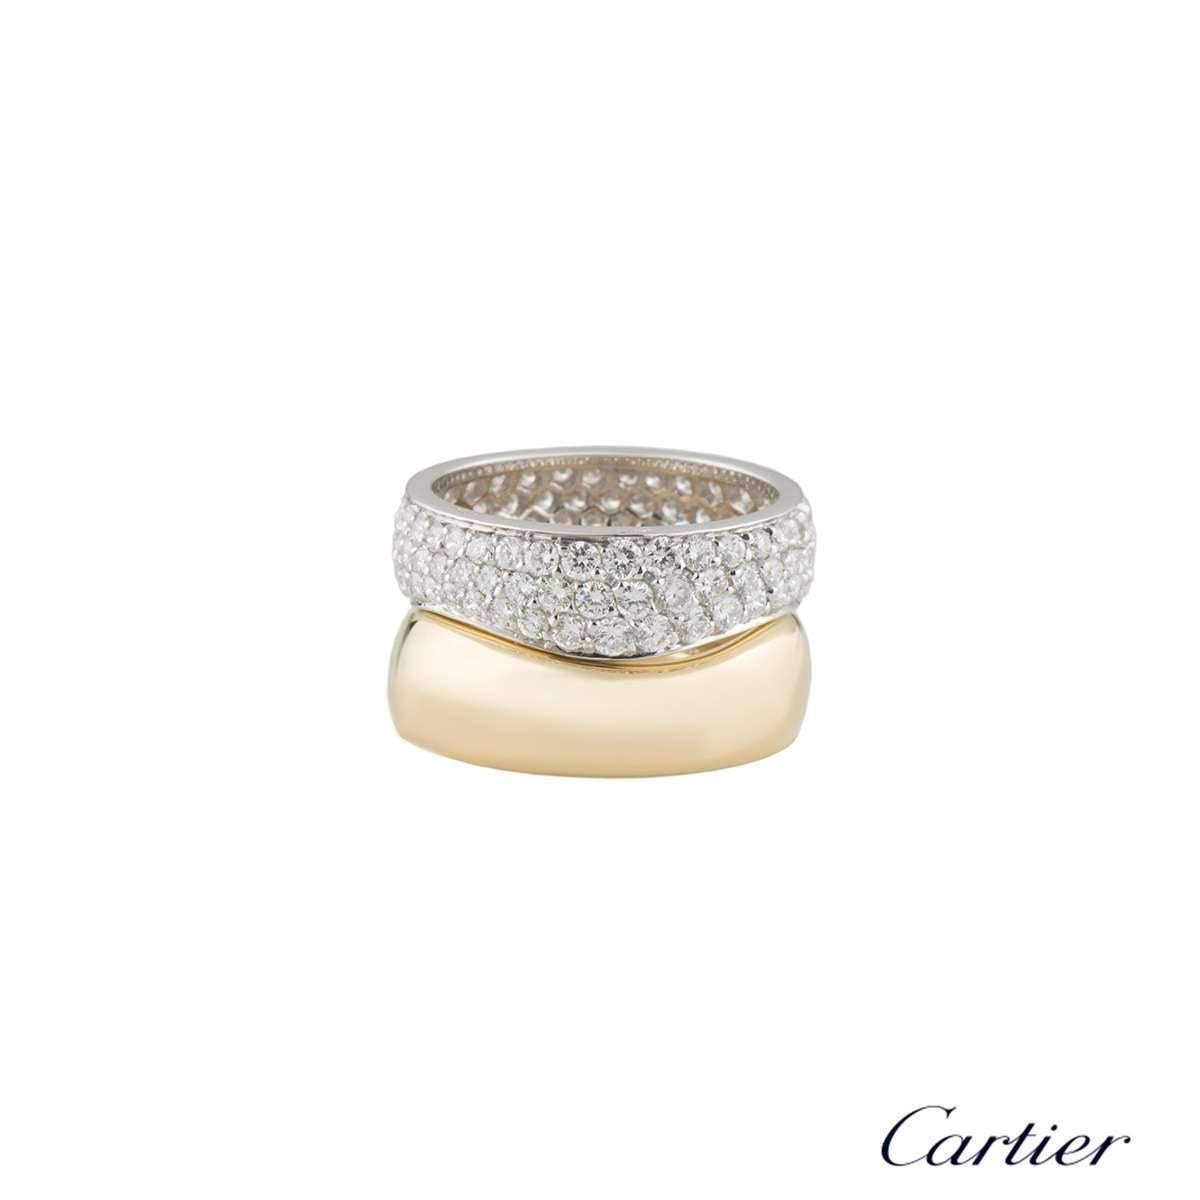 A beautiful 18k white and yellow gold double stacker ring by Cartier. The ring is composed of 2 waved bands. One band is pave set with 102 round brilliant cut diamonds totalling approximately 1.73ct, predominantly F in colour and VS-VVS in clarity.